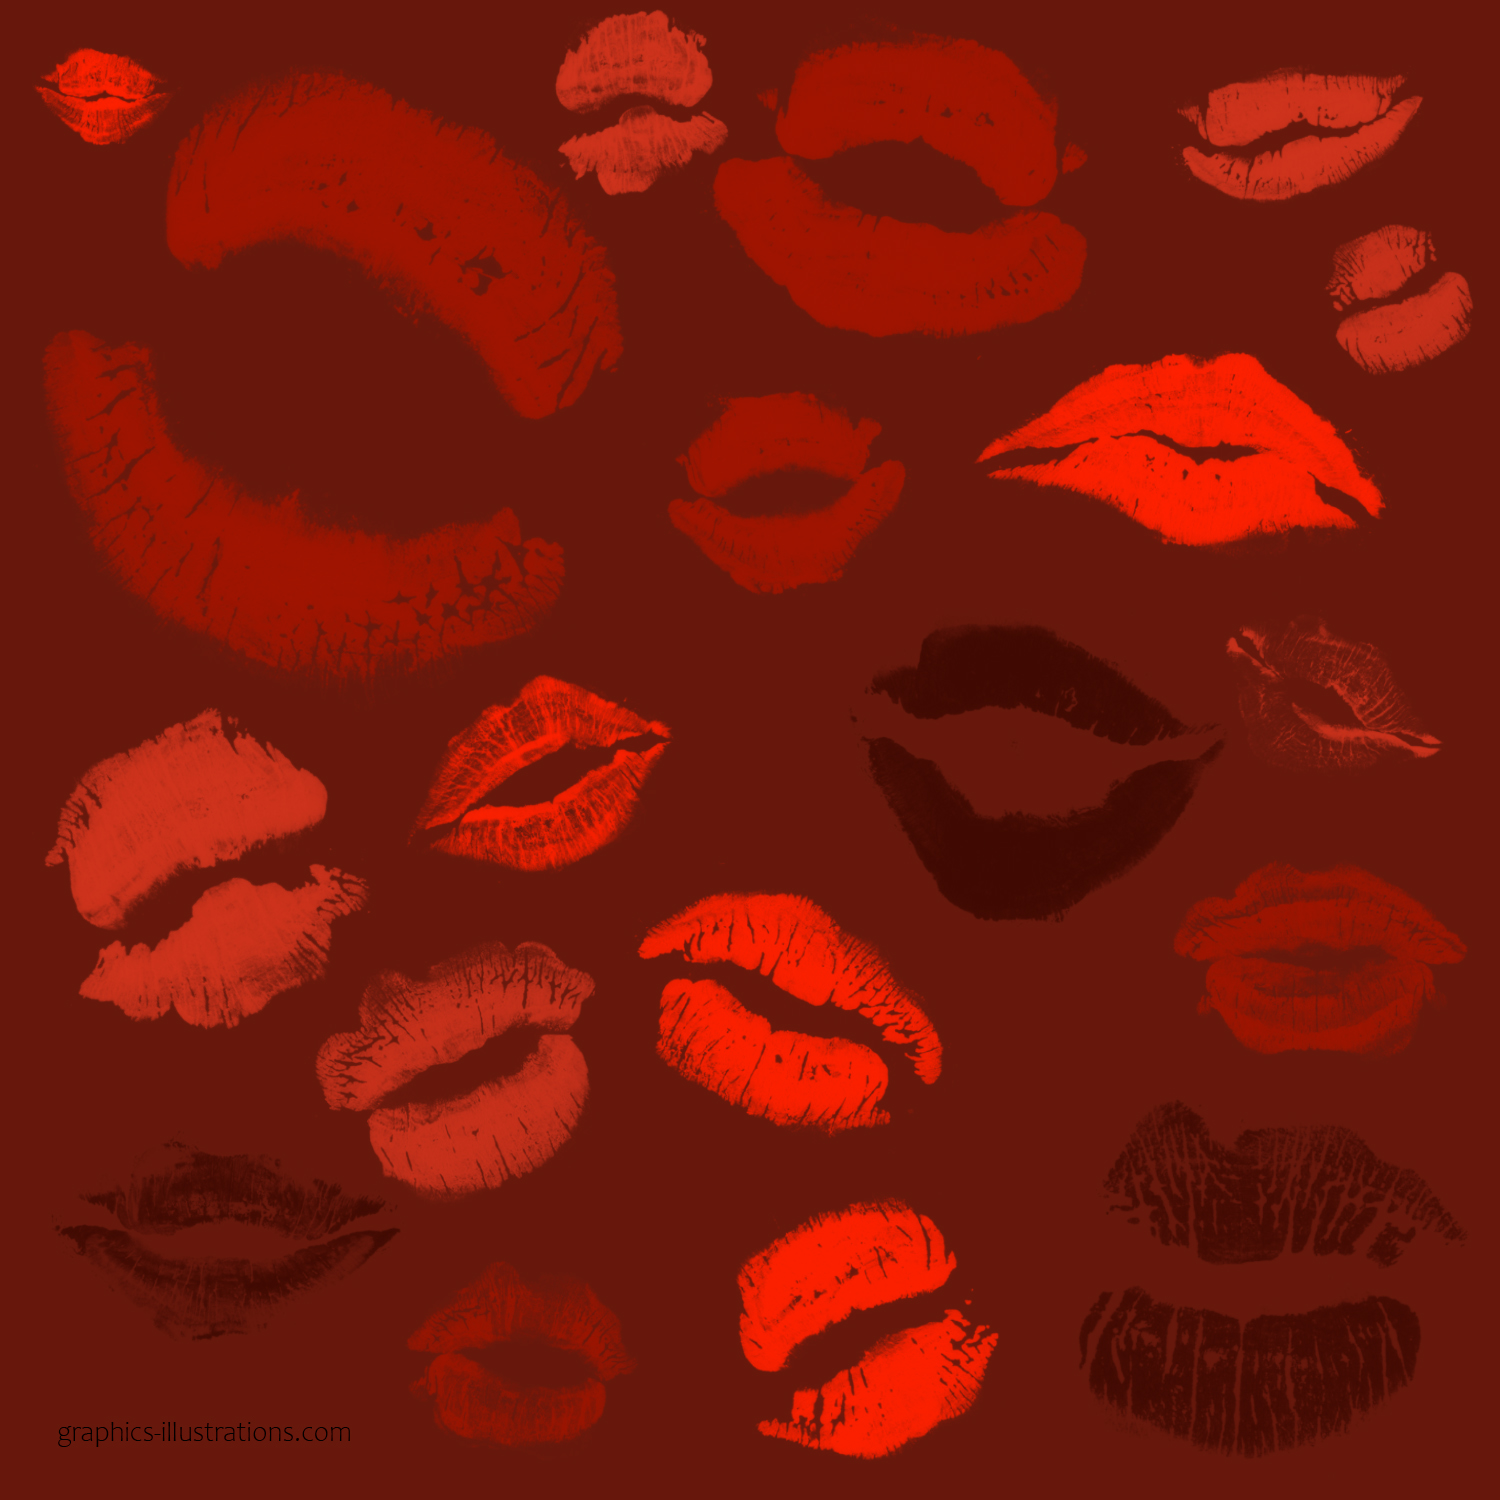 Photoshop kiss brushes (free download is here)